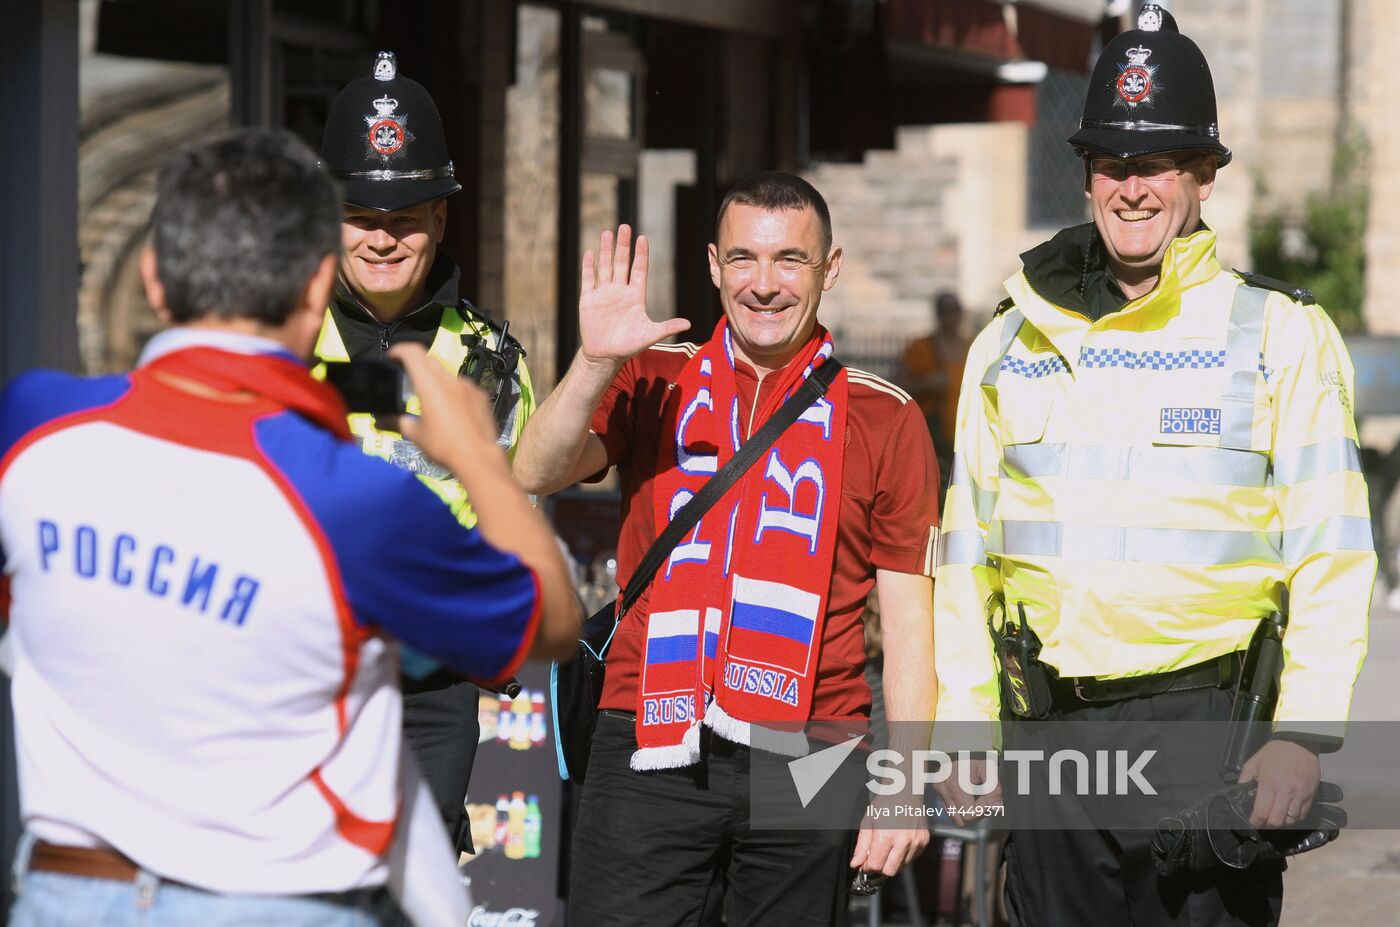 Russia national football team fans visiting Cardiff, Wales